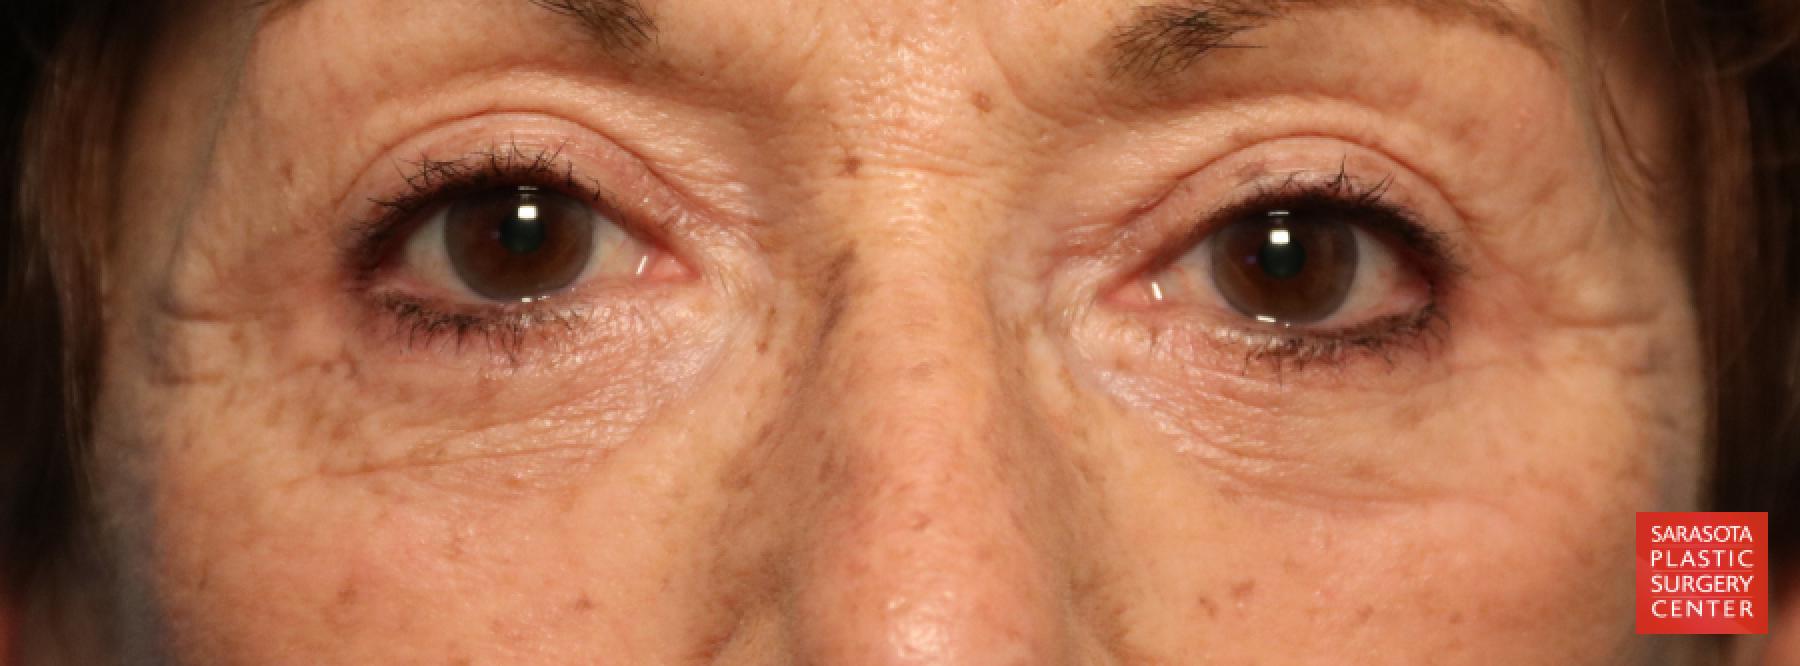 Eyelid Lift: Patient 6 - After  